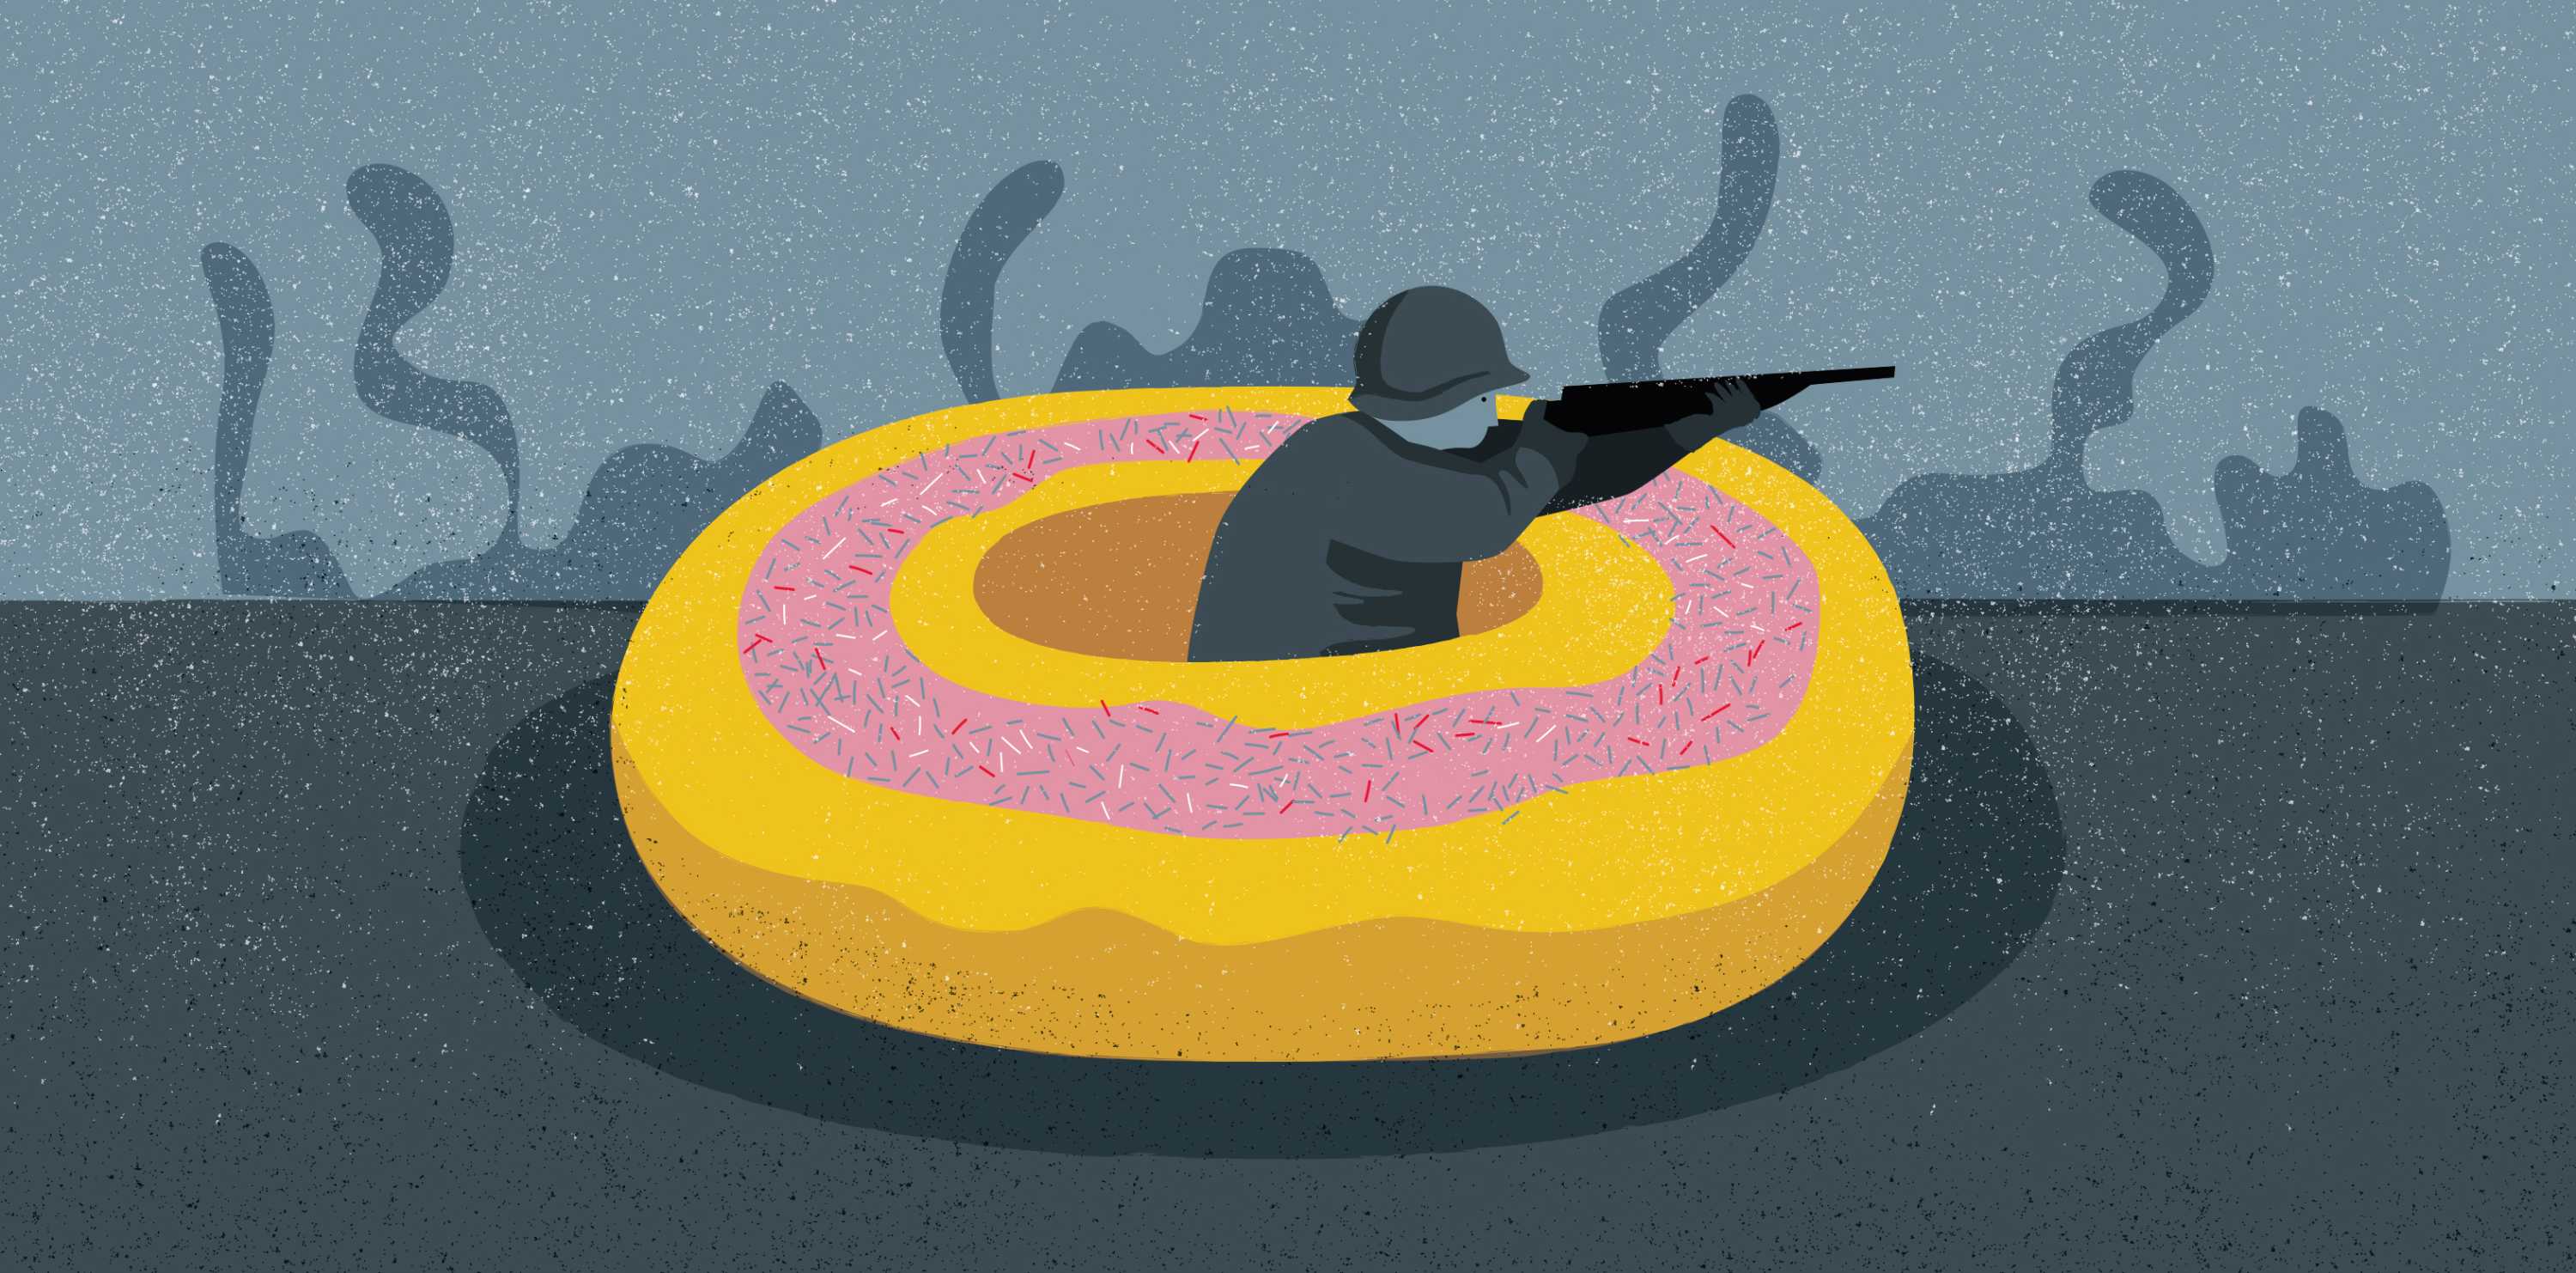 The Doughnut — the delicious treat that makes war more palatable for the American people